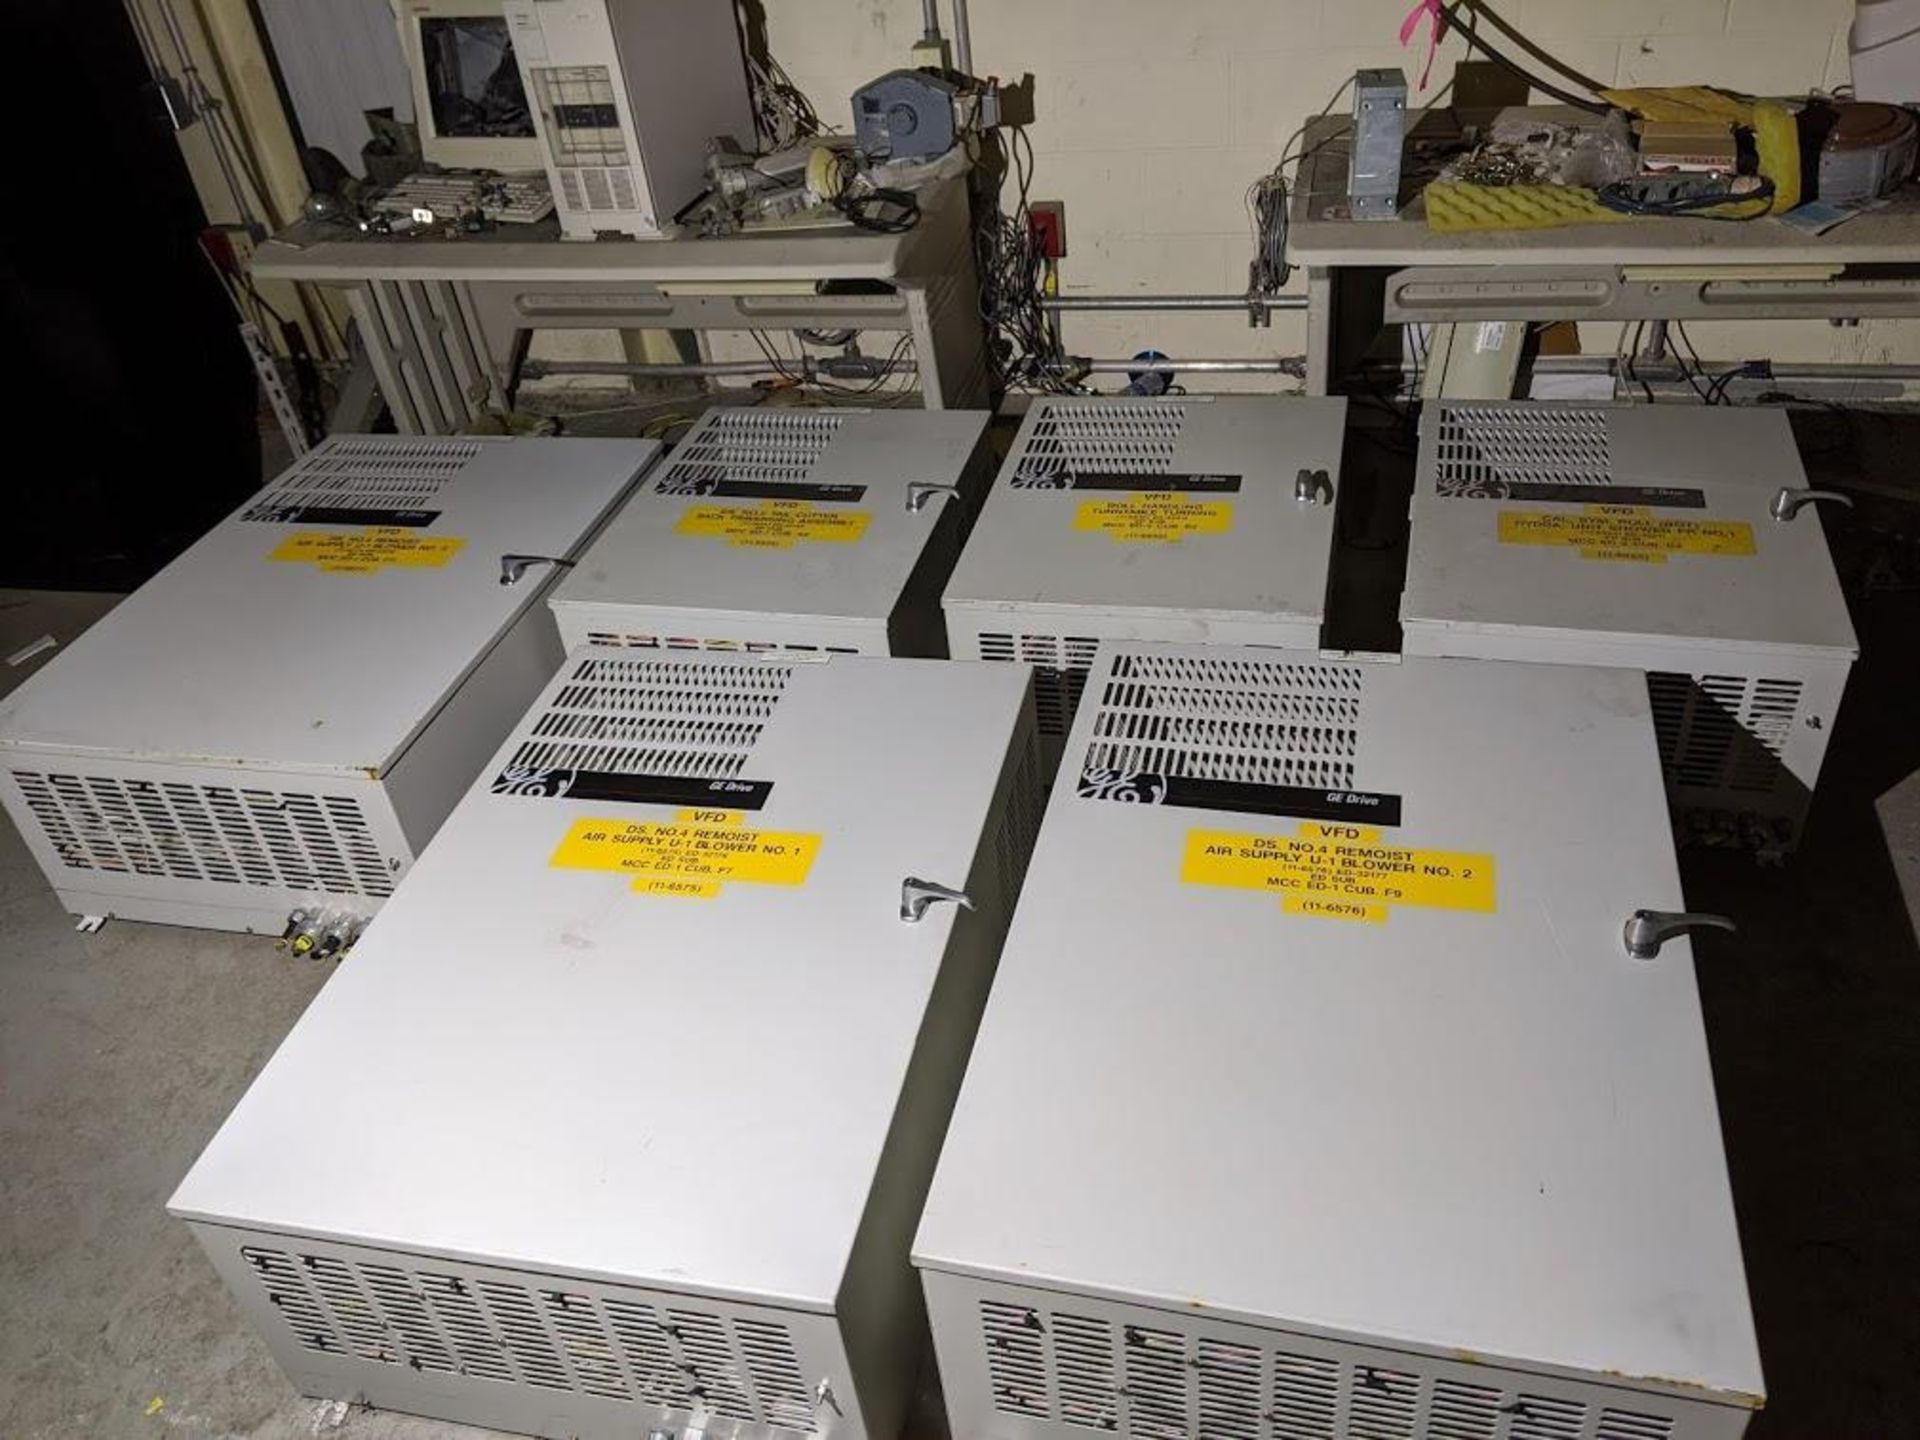 LOT OF GE DRIVE VFD ENCLOSURE CABINETS (DRIVES NOT INCLUDED) HIT # OK233 - Image 3 of 7